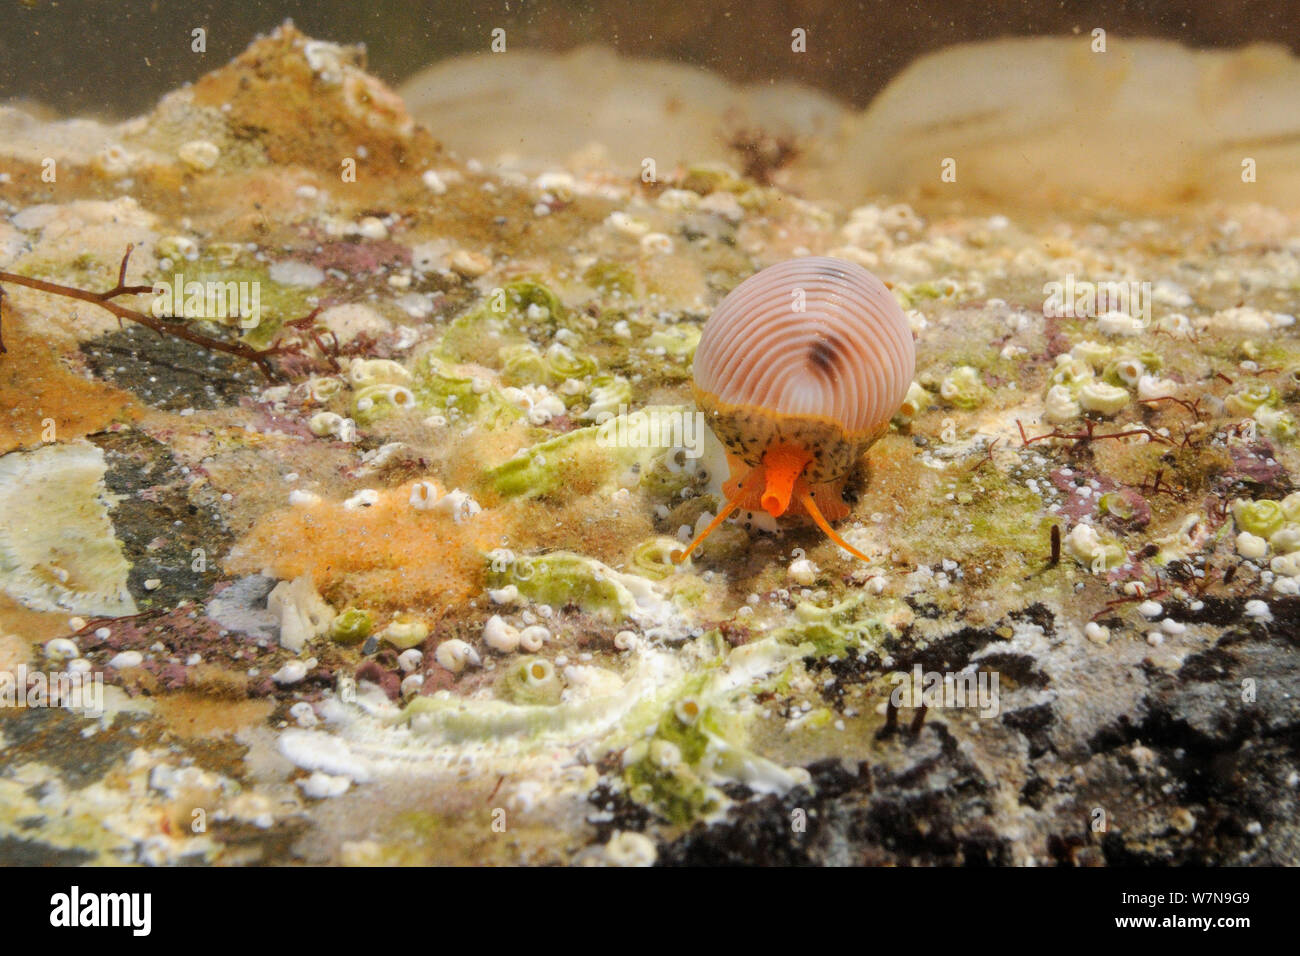 Head on view of Spotted cowrie (Trivia monacha) crawling over subtidal rock encrusted with serpulid worm tubes and sponges, with siphon, tentacles and eyes, visible, near Falmouth, Cornwall, UK, August. Stock Photo